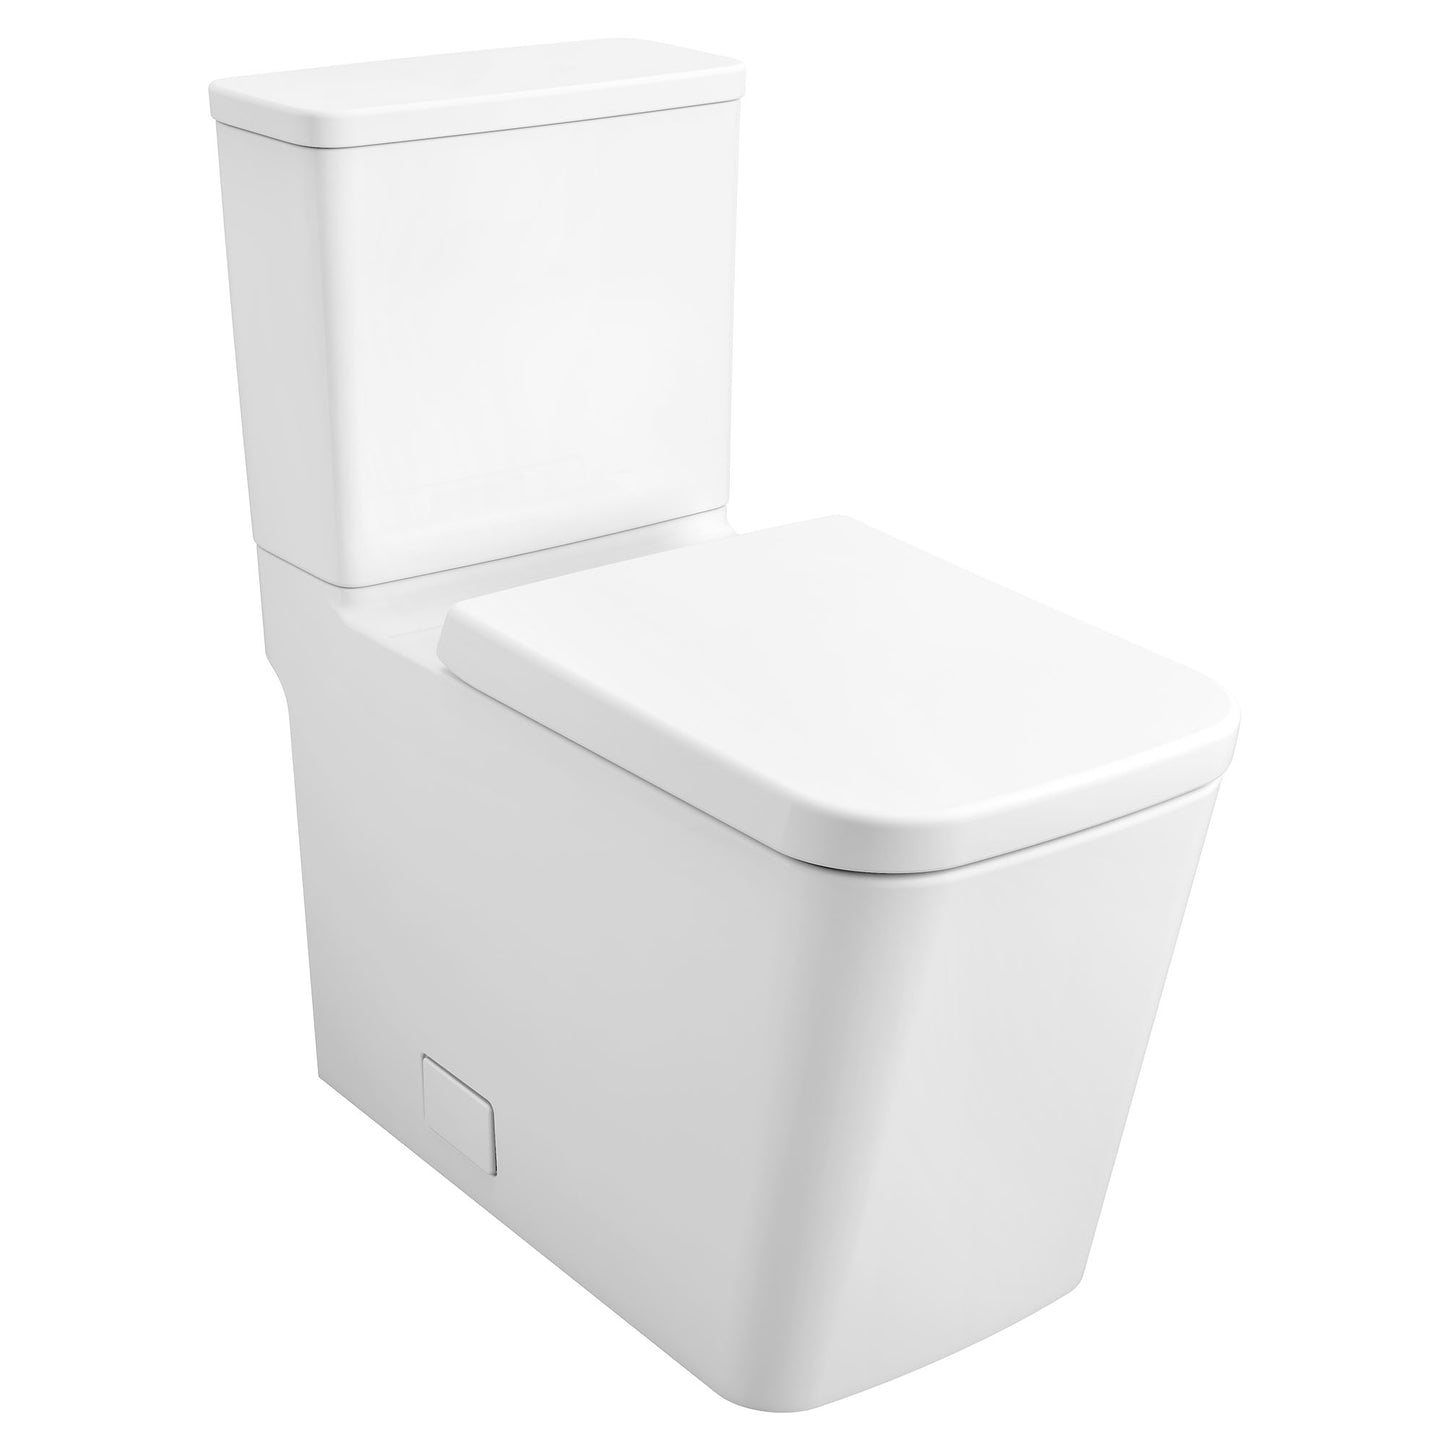 GROHE 39663000 Eurocube Alpine White Two-piece Right height Elongated Toilet with seat, Right-Hand Trip Lever